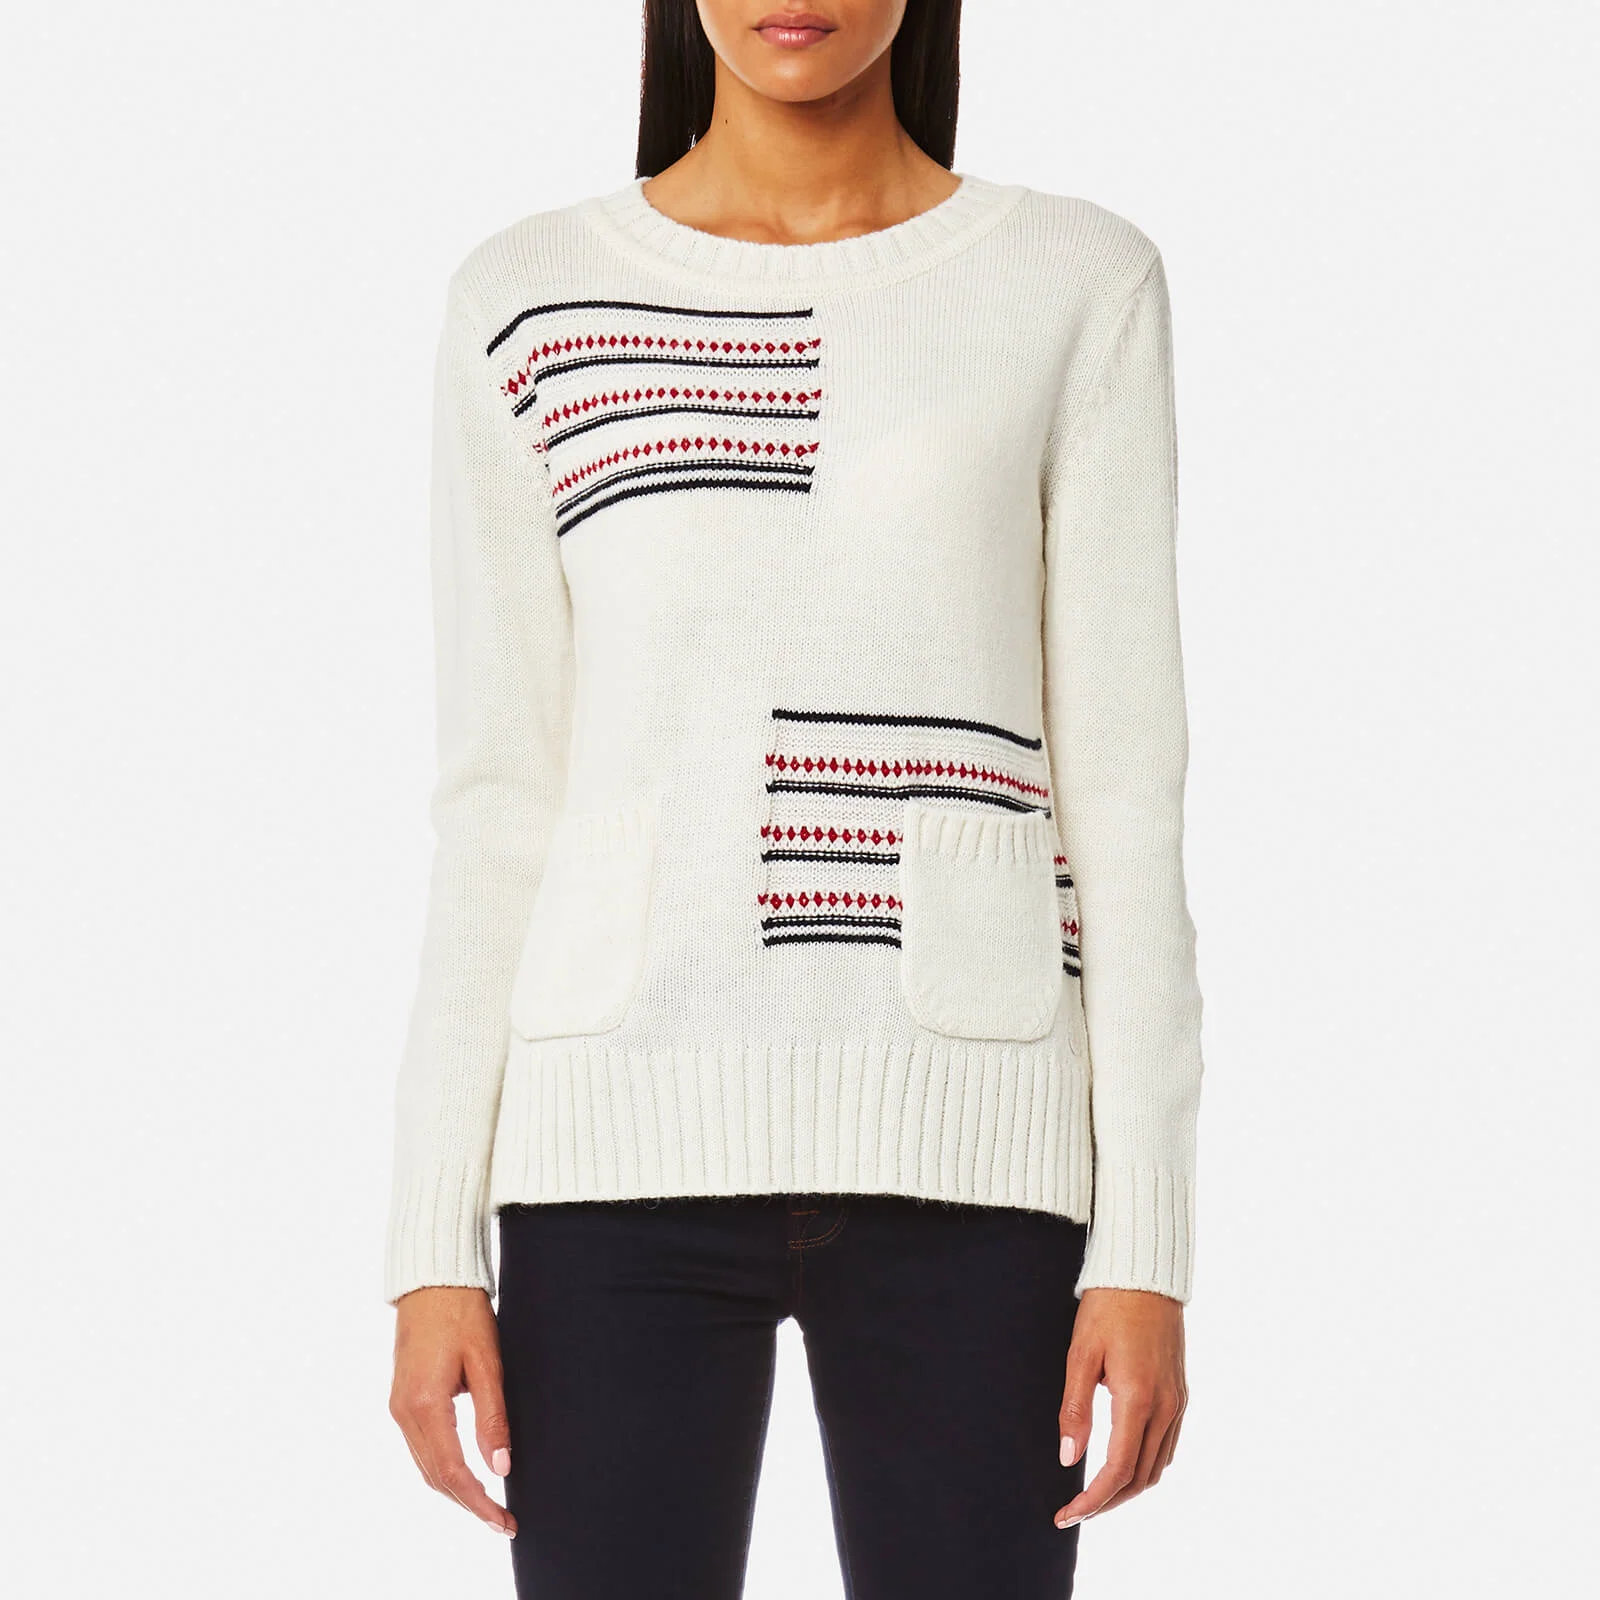 Barbour Women's Seaton Knitted Jumper - Cloud Image 1